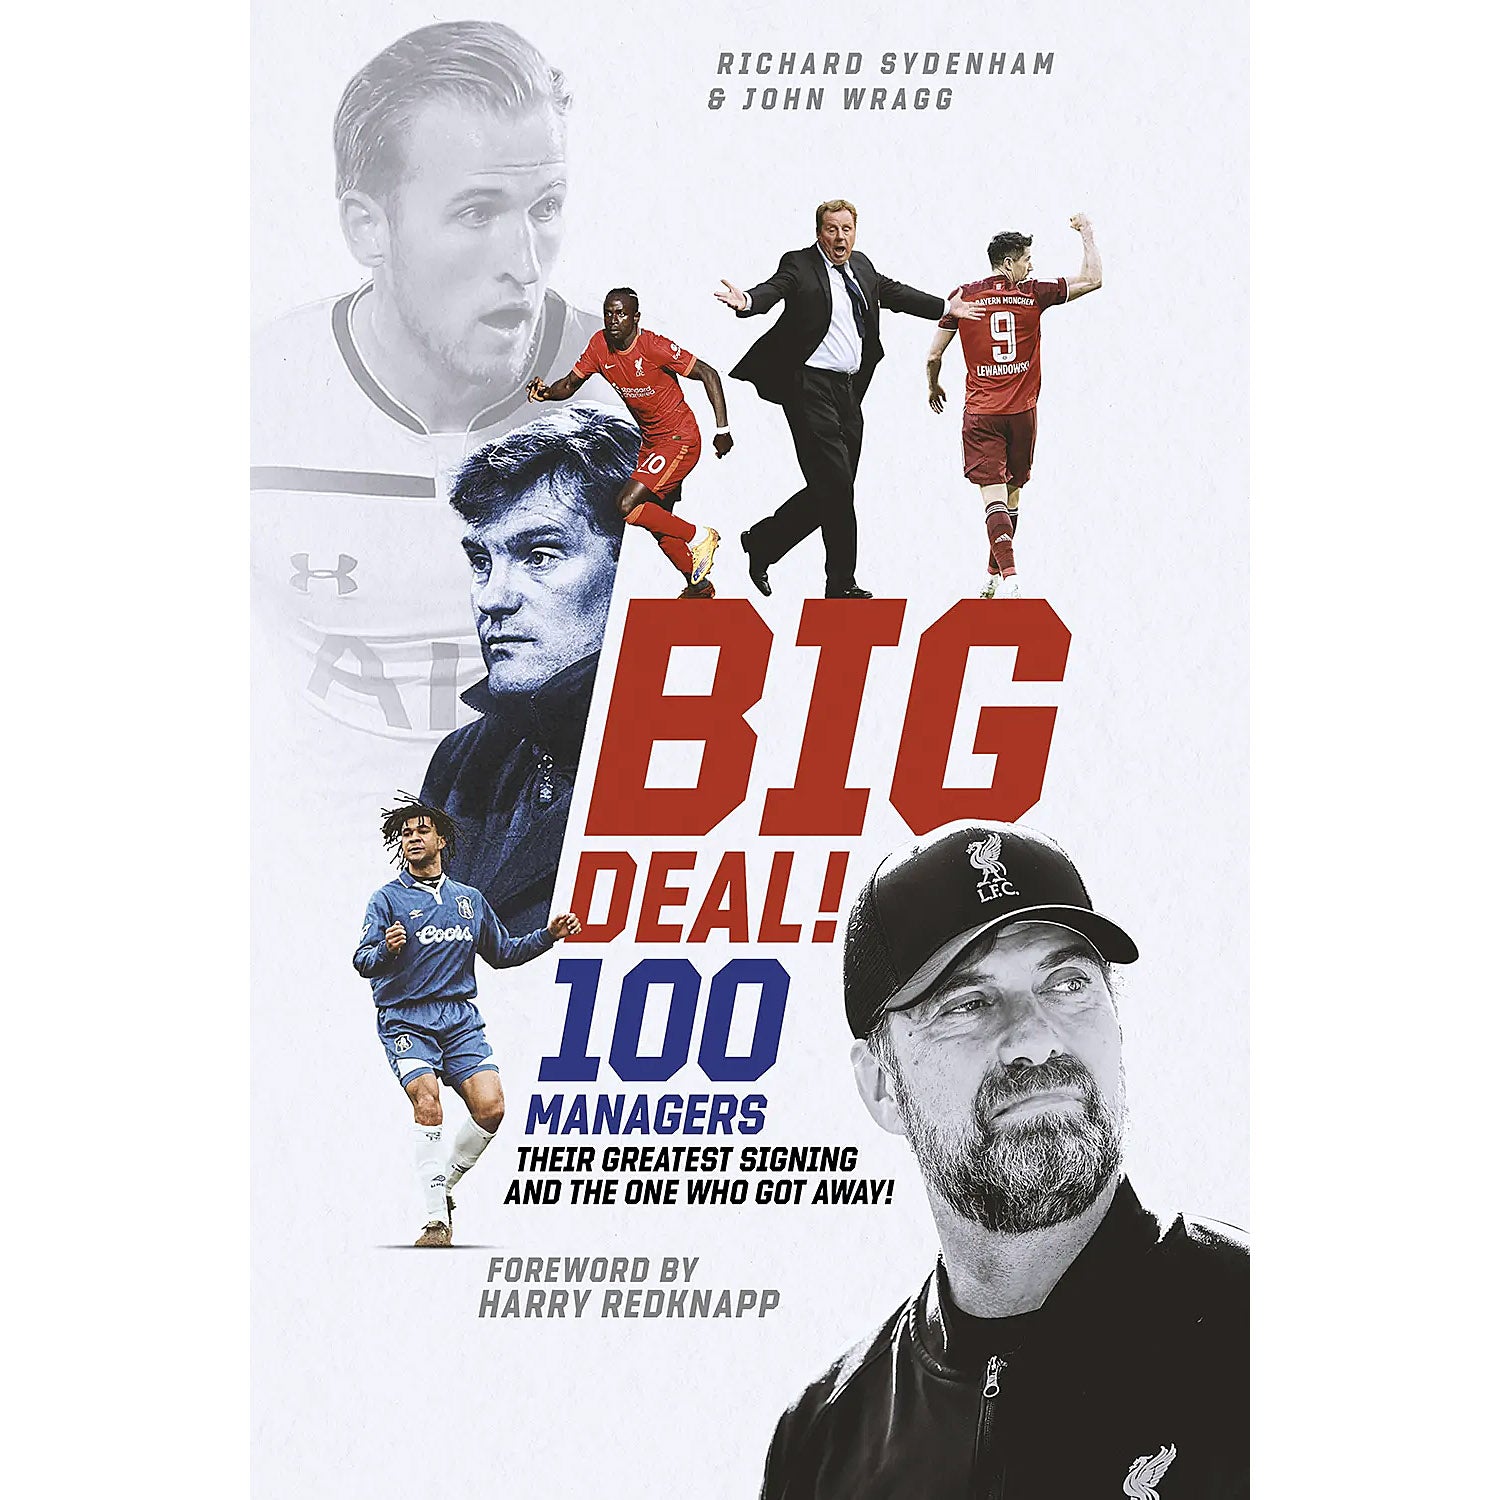 Big Deal! 100 Managers, Their Greatest Signing and The One Who Got Away